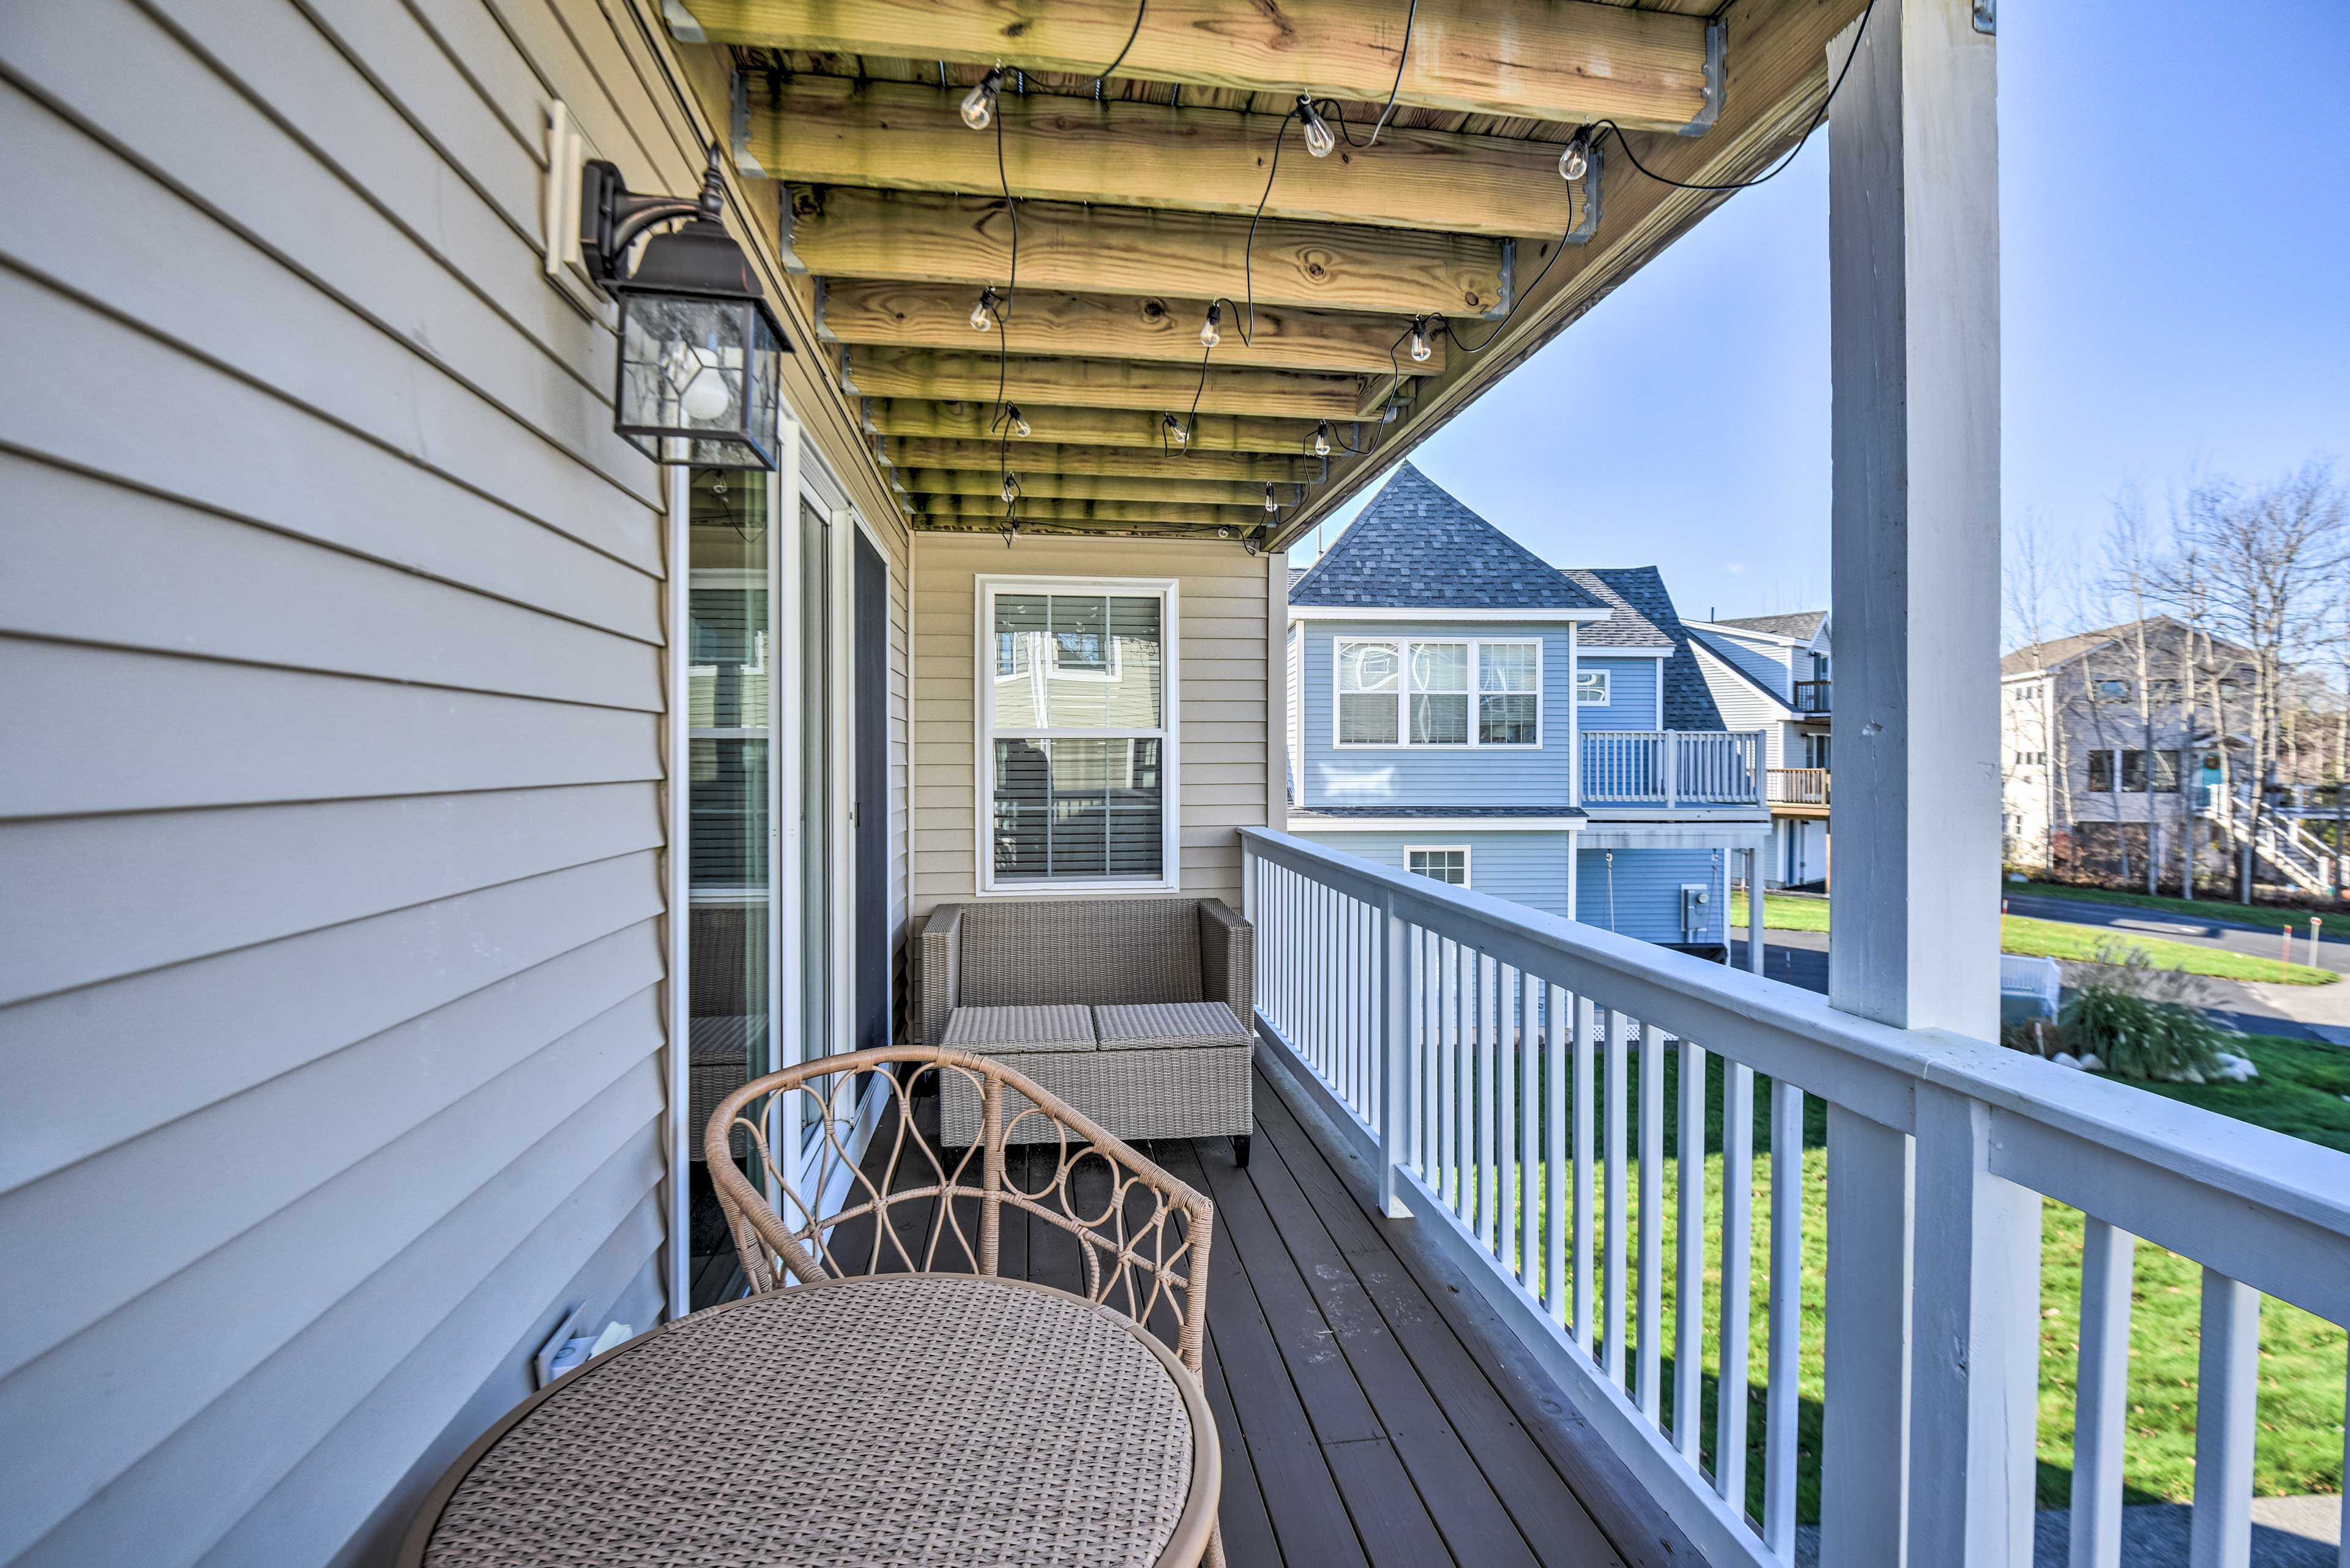 Wraparound Deck | Outdoor Dining Area | Seating | Gas Grill (Propane Provided)